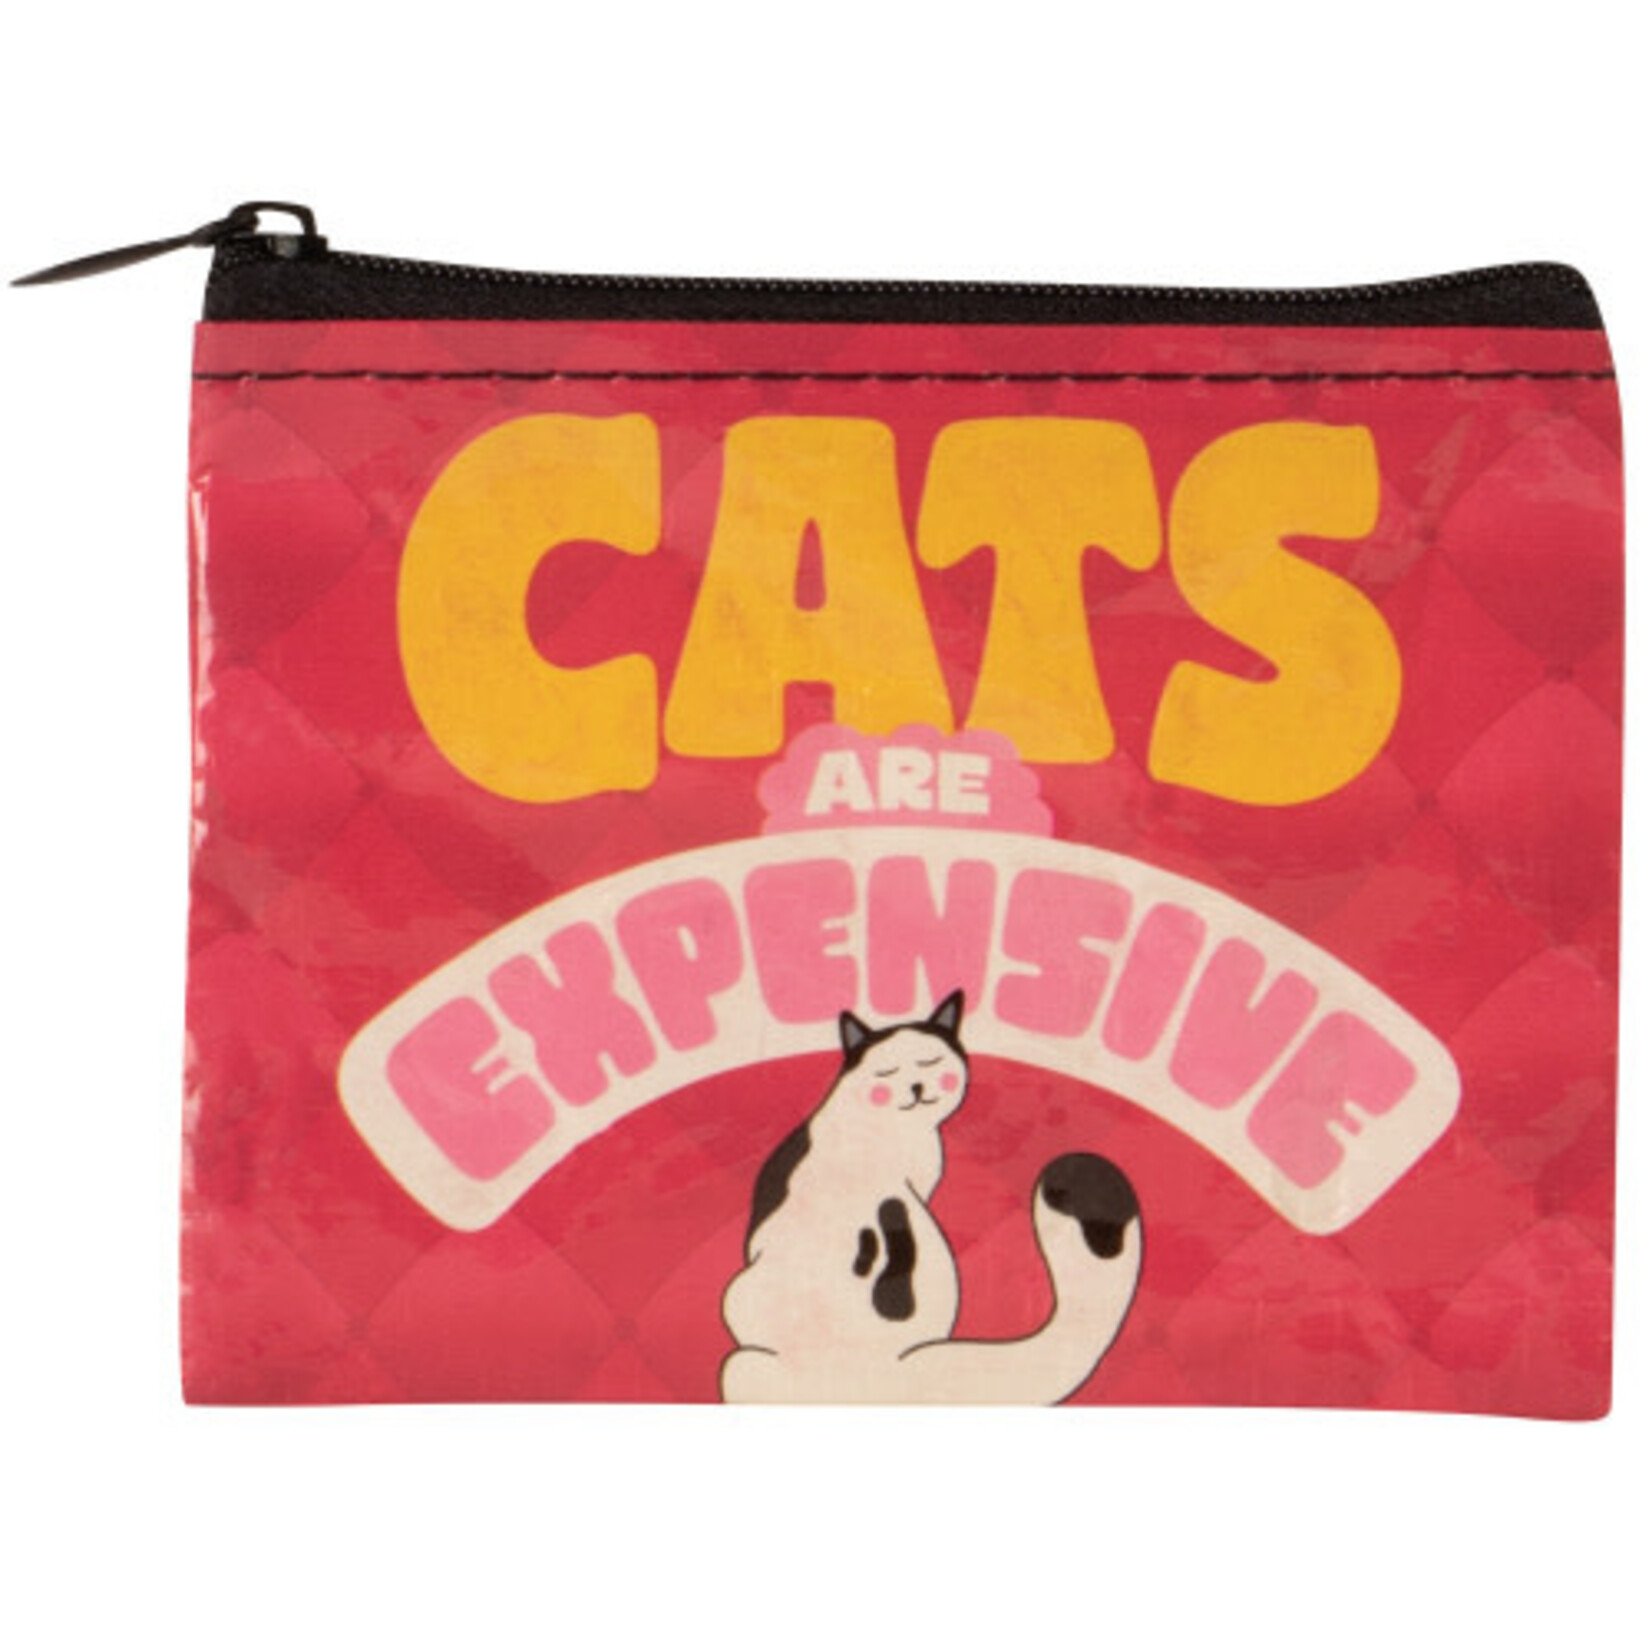 Blue Q Cats are Expensive Coin Purse